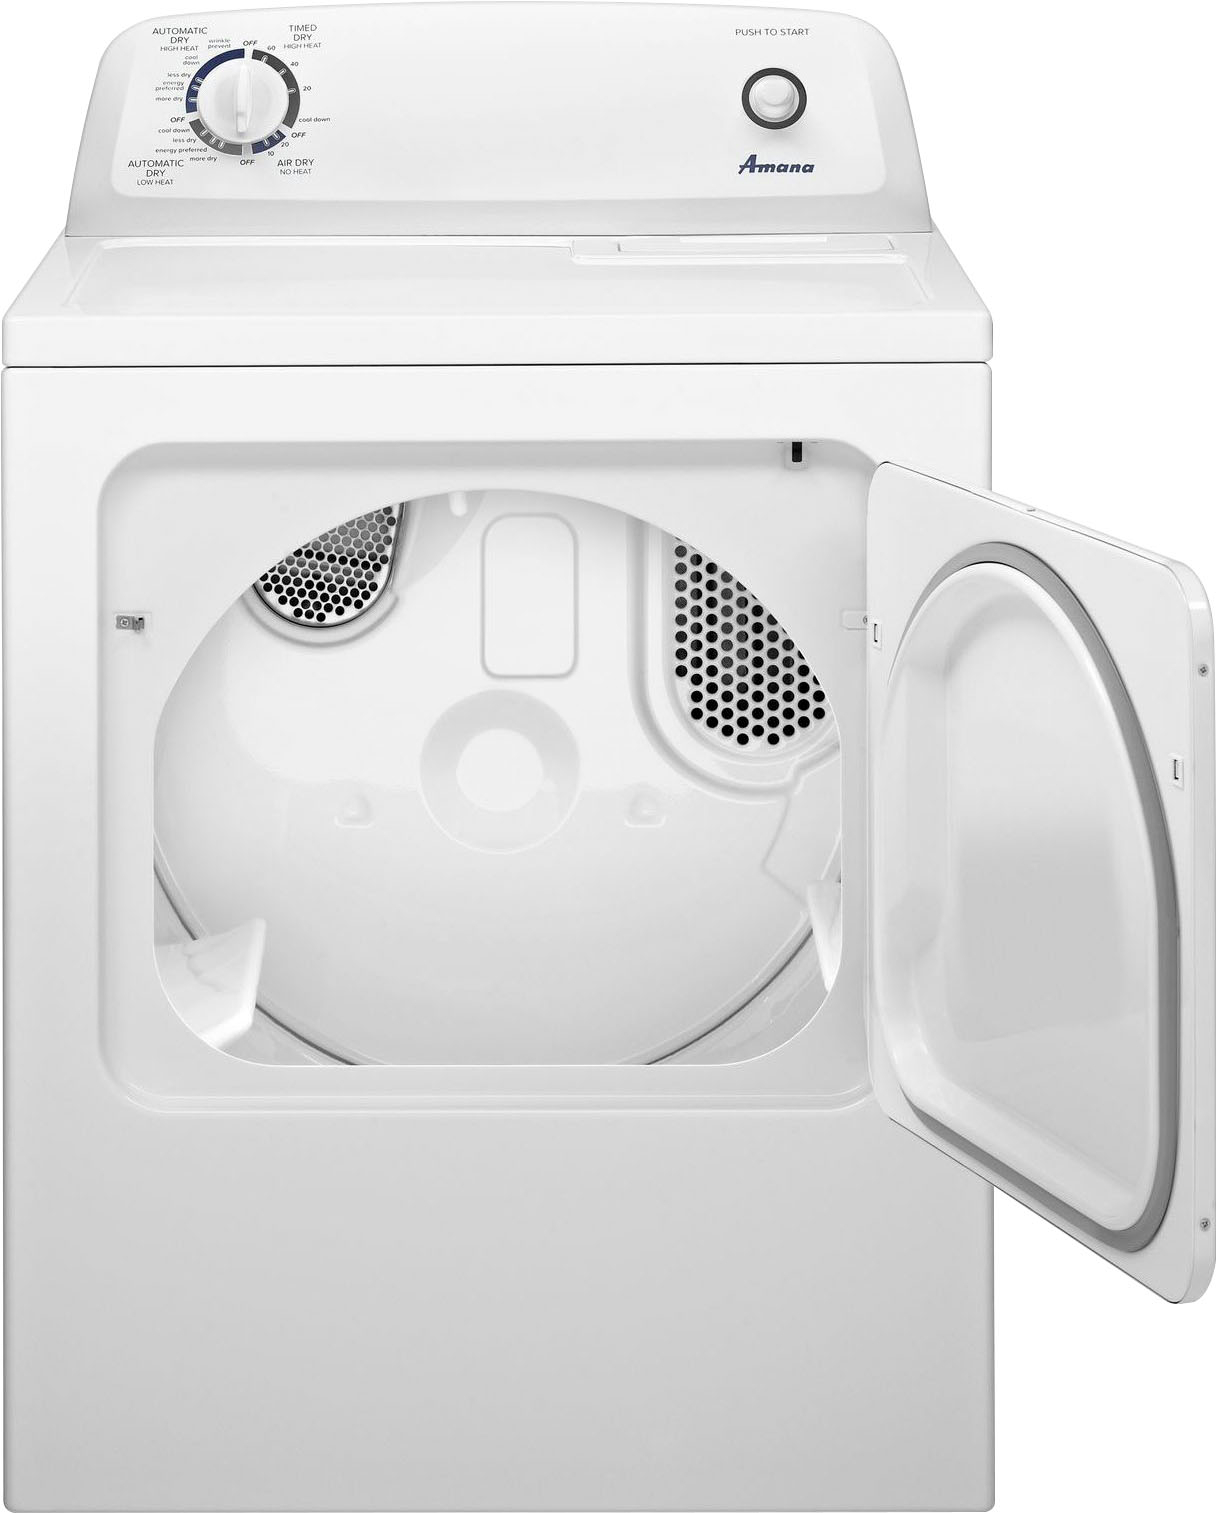 Angle View: Whirlpool - Cabrio 7.0 Cu. Ft. 24-Cycle Electric Dryer - White